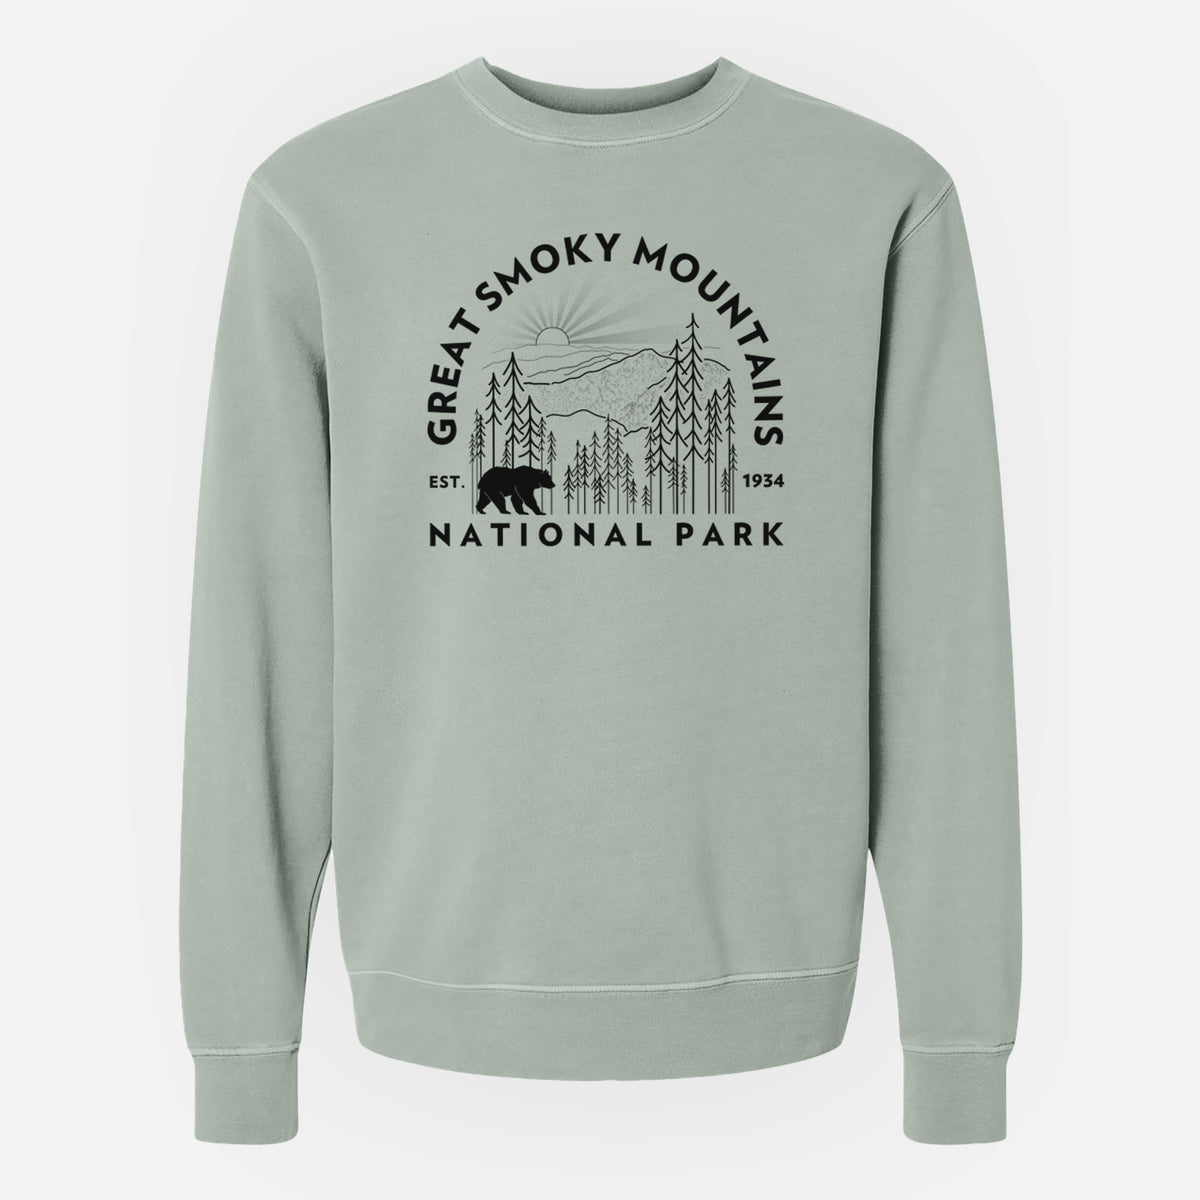 Great Smoky Mountains National Park - Unisex Pigment Dyed Crew Sweatshirt